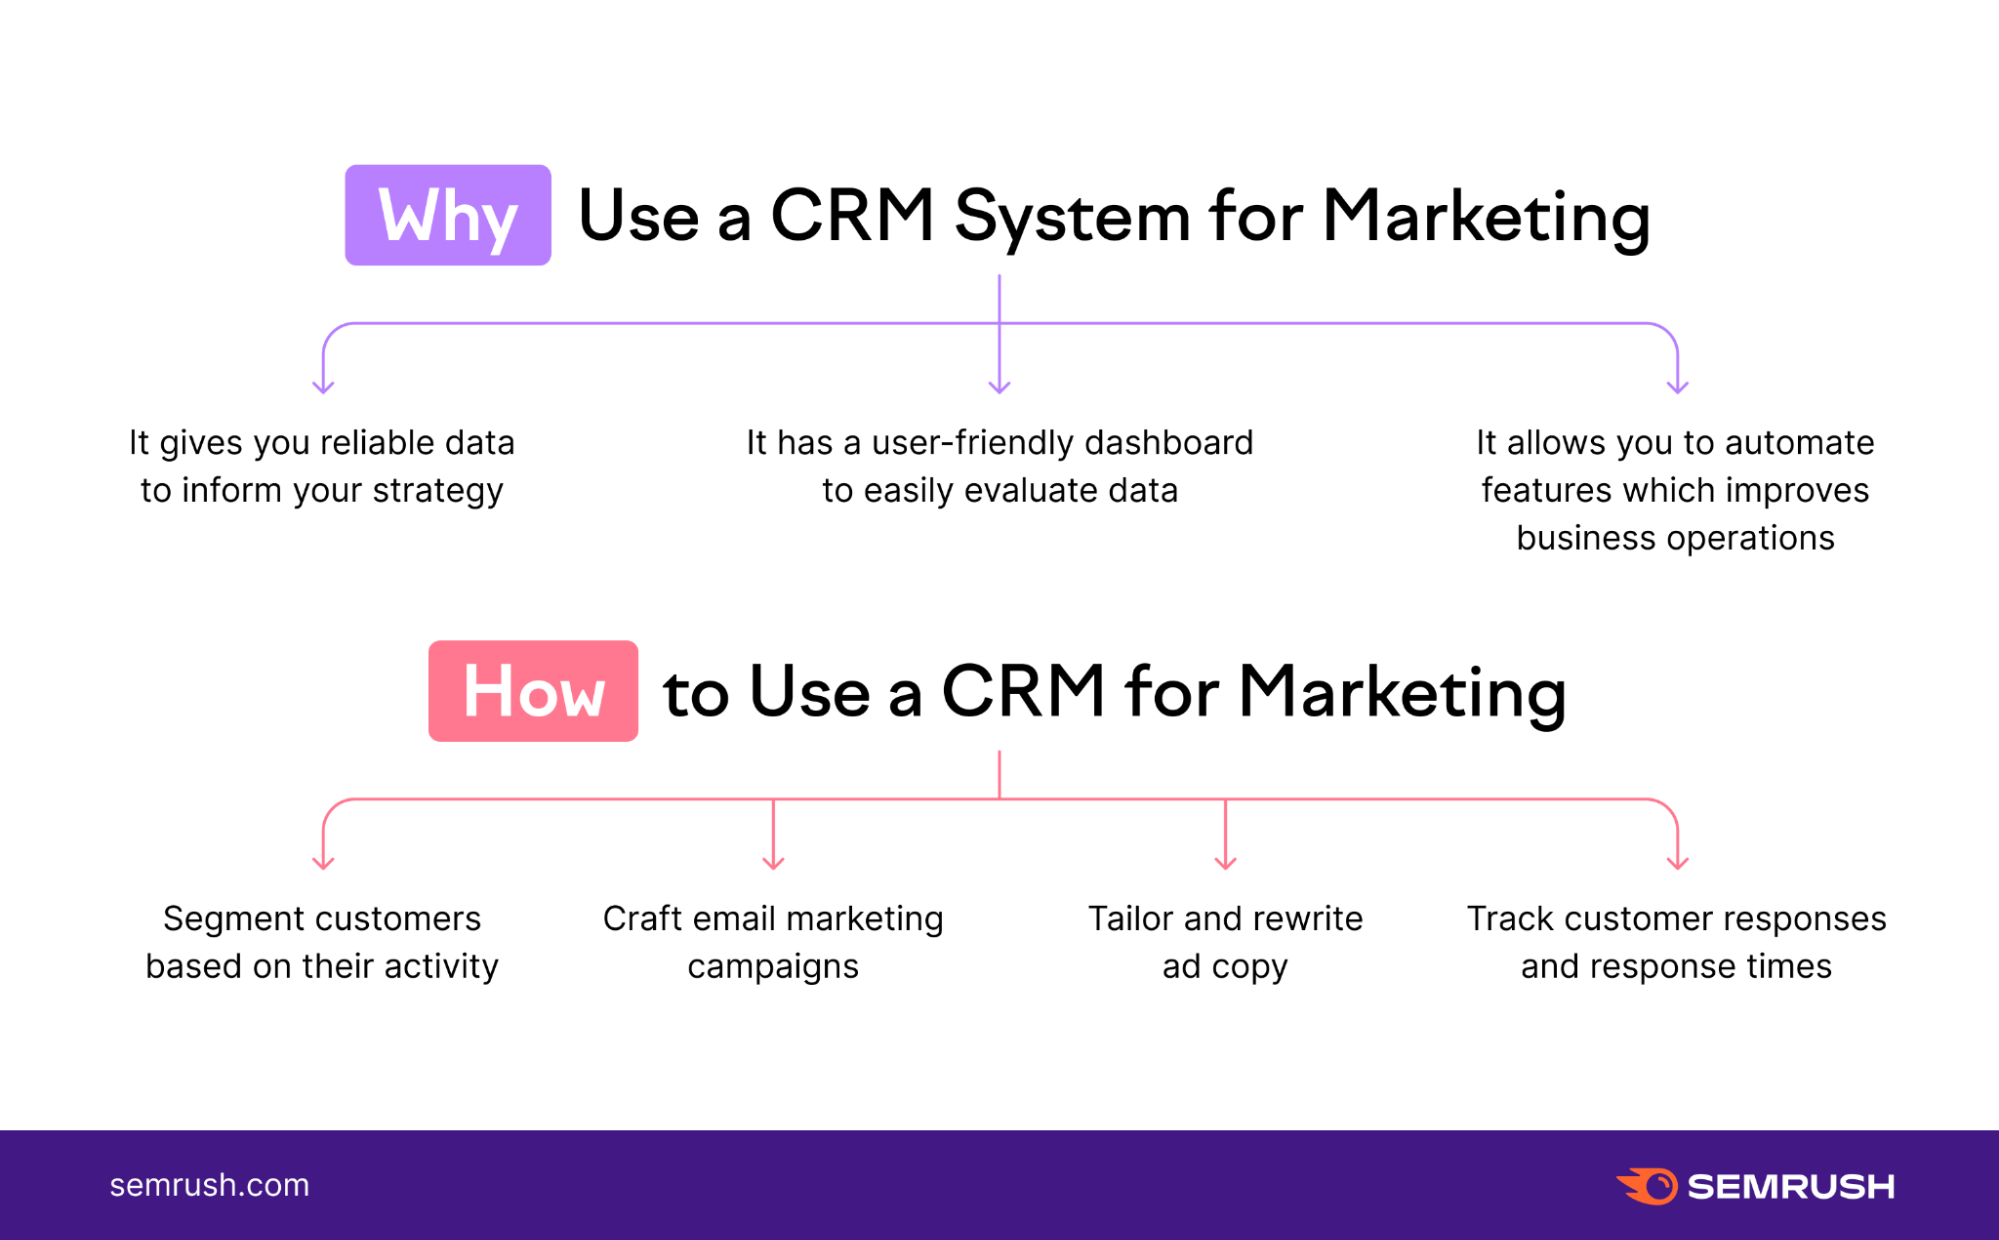 Using a CRM for marketing provides teams with reliable data, a user-friendly dashboard, and automation for different channels